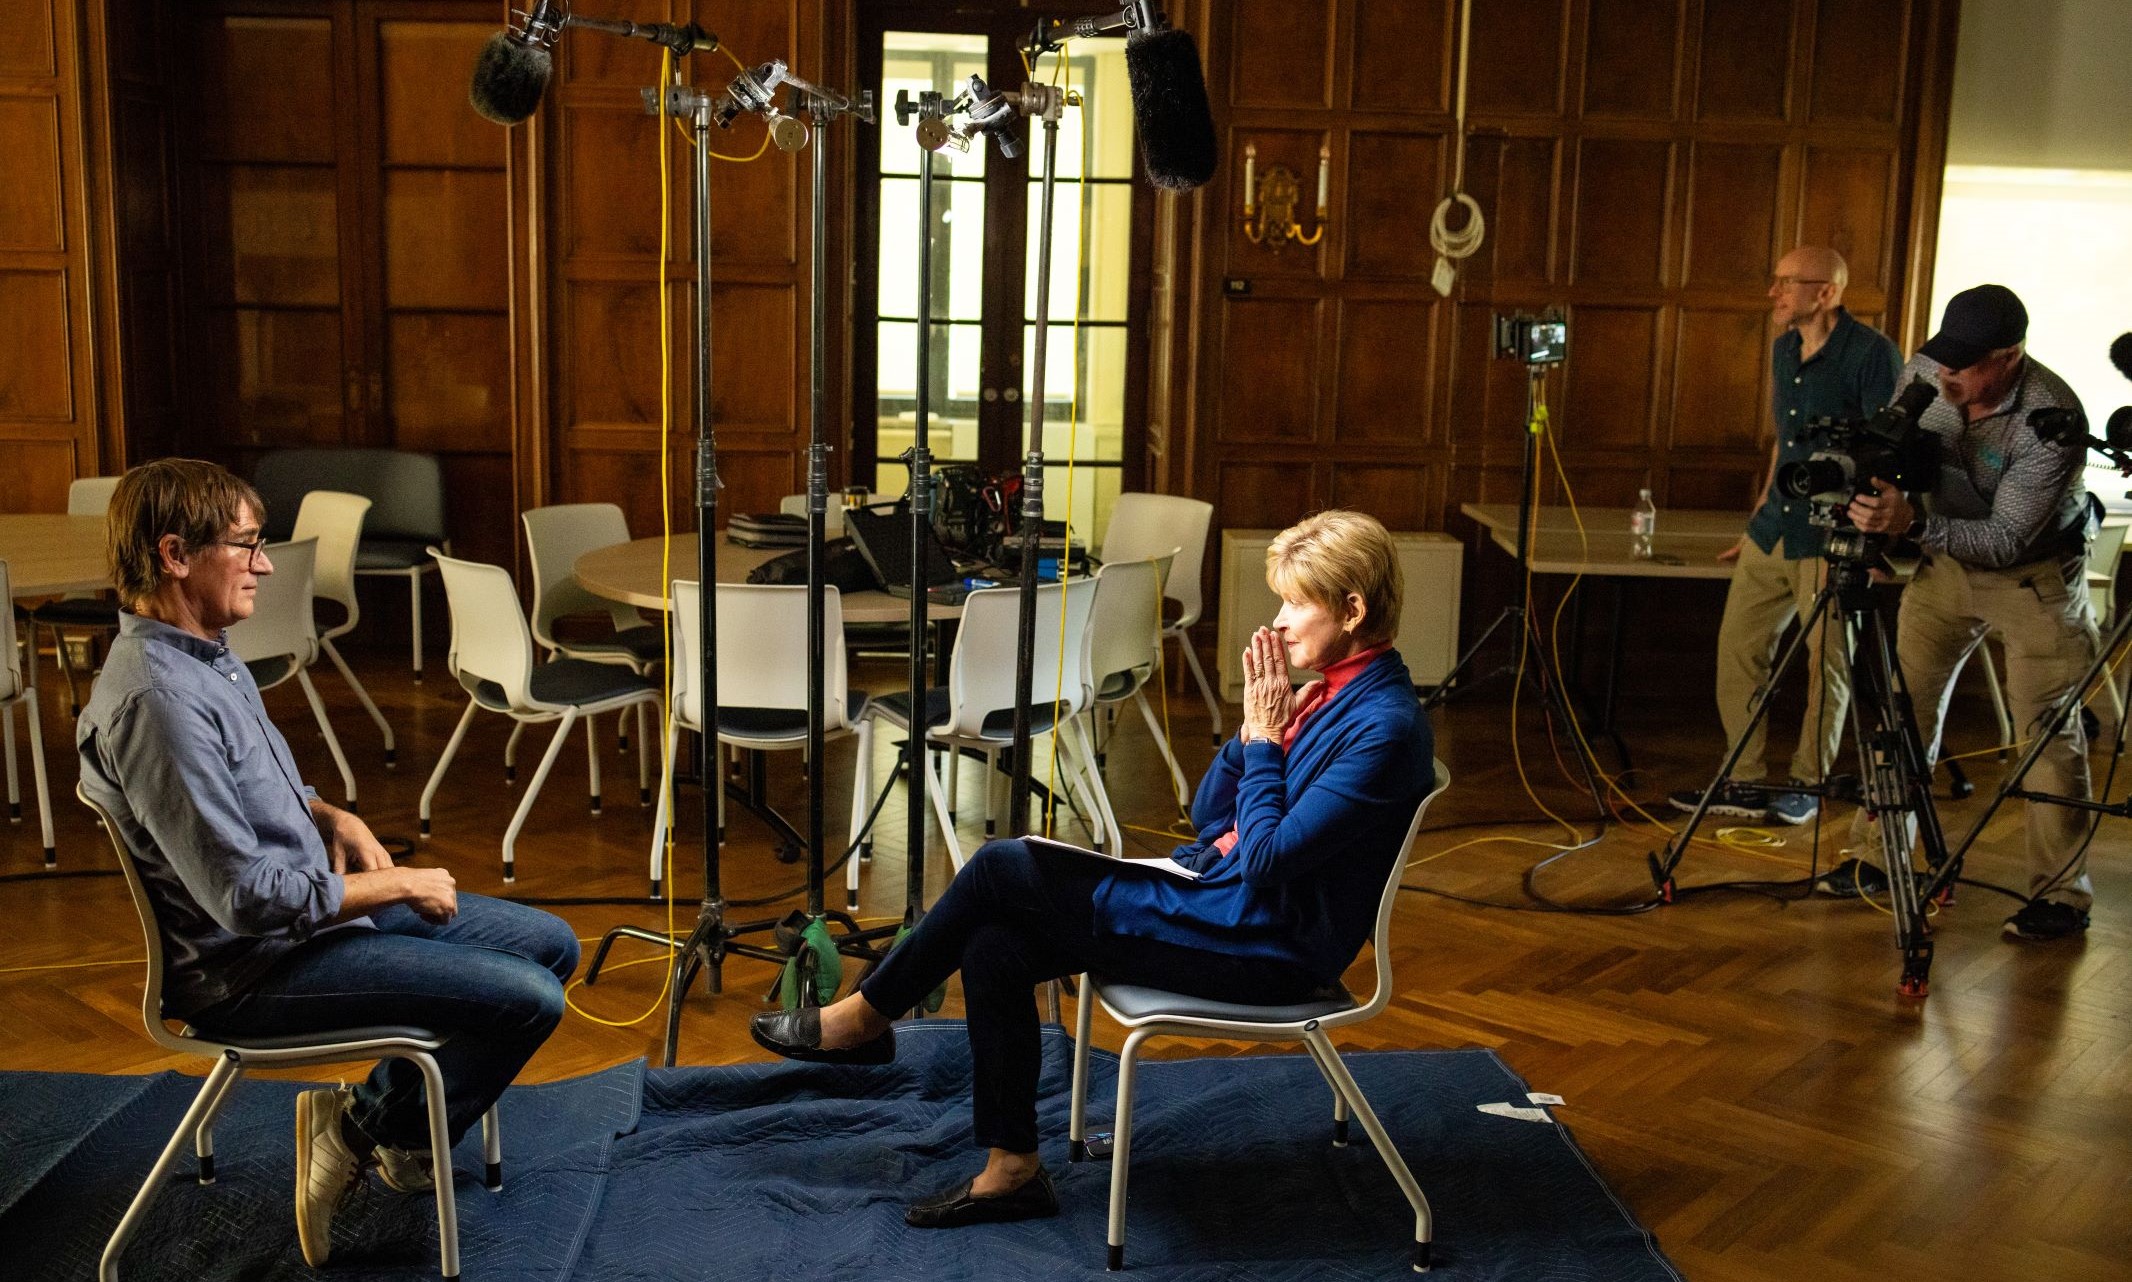 Clancy Martin sits facing CBS reporter Susan Spencer with recording equipment above them and to the right side